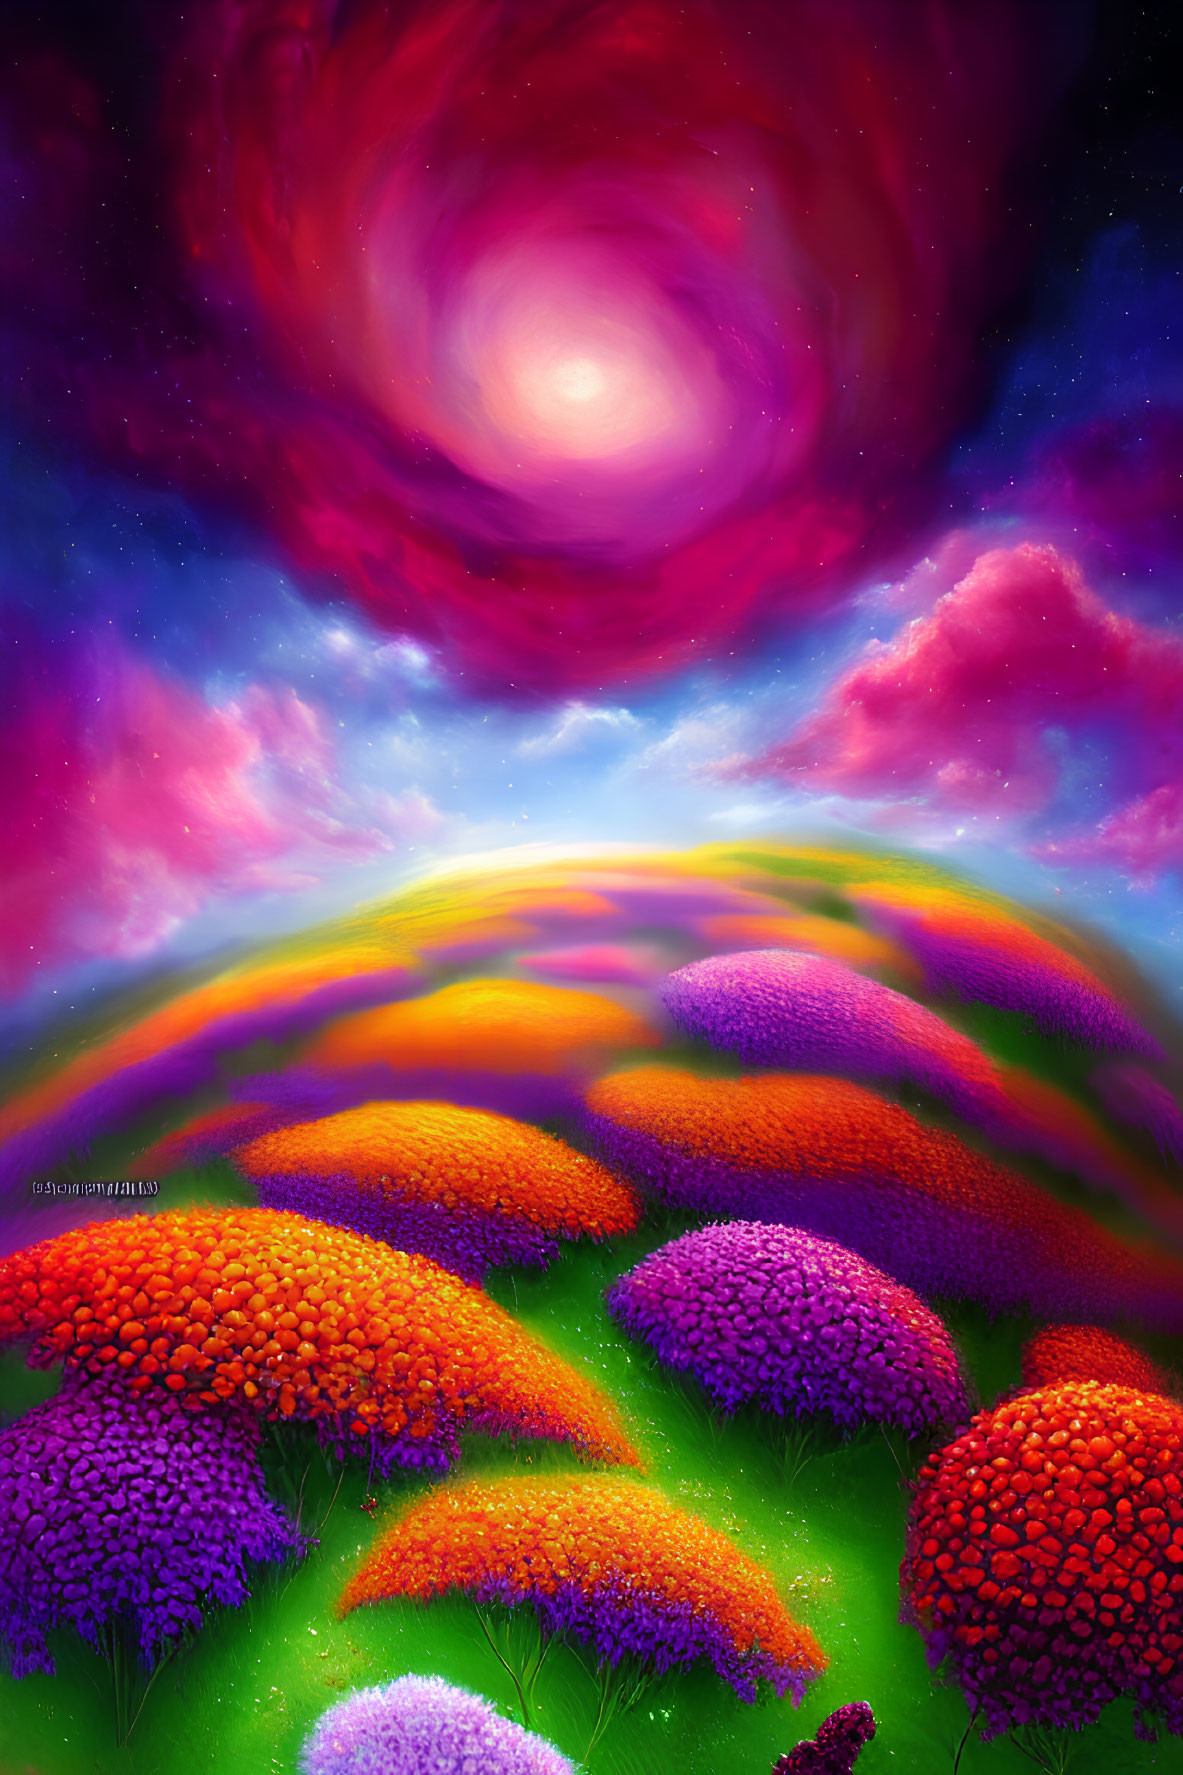 Colorful undulating hills with orange and purple trees under a pink and blue sky